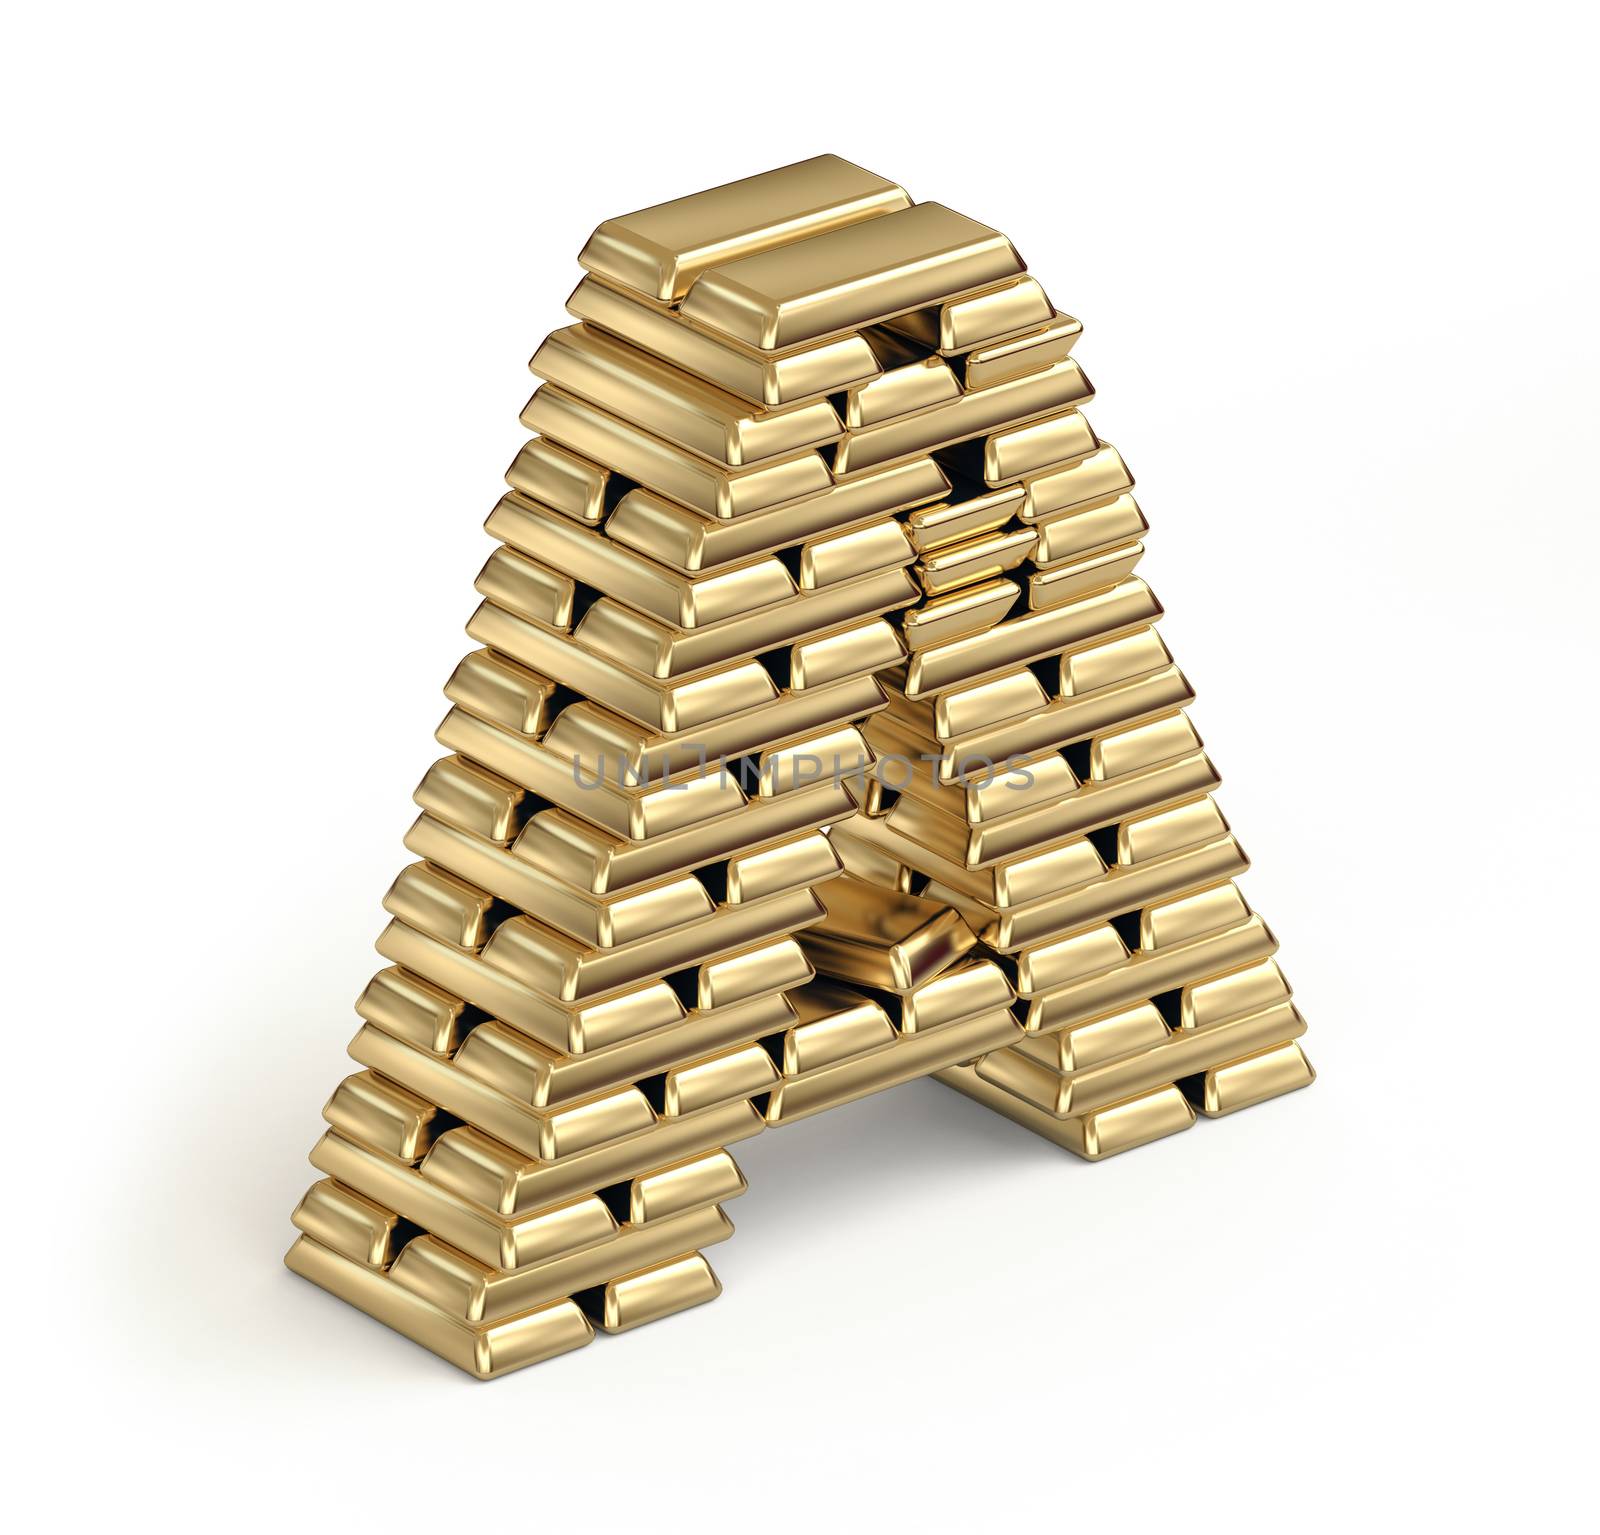 Letter A from stacked gold bars 3d in isometric on white background